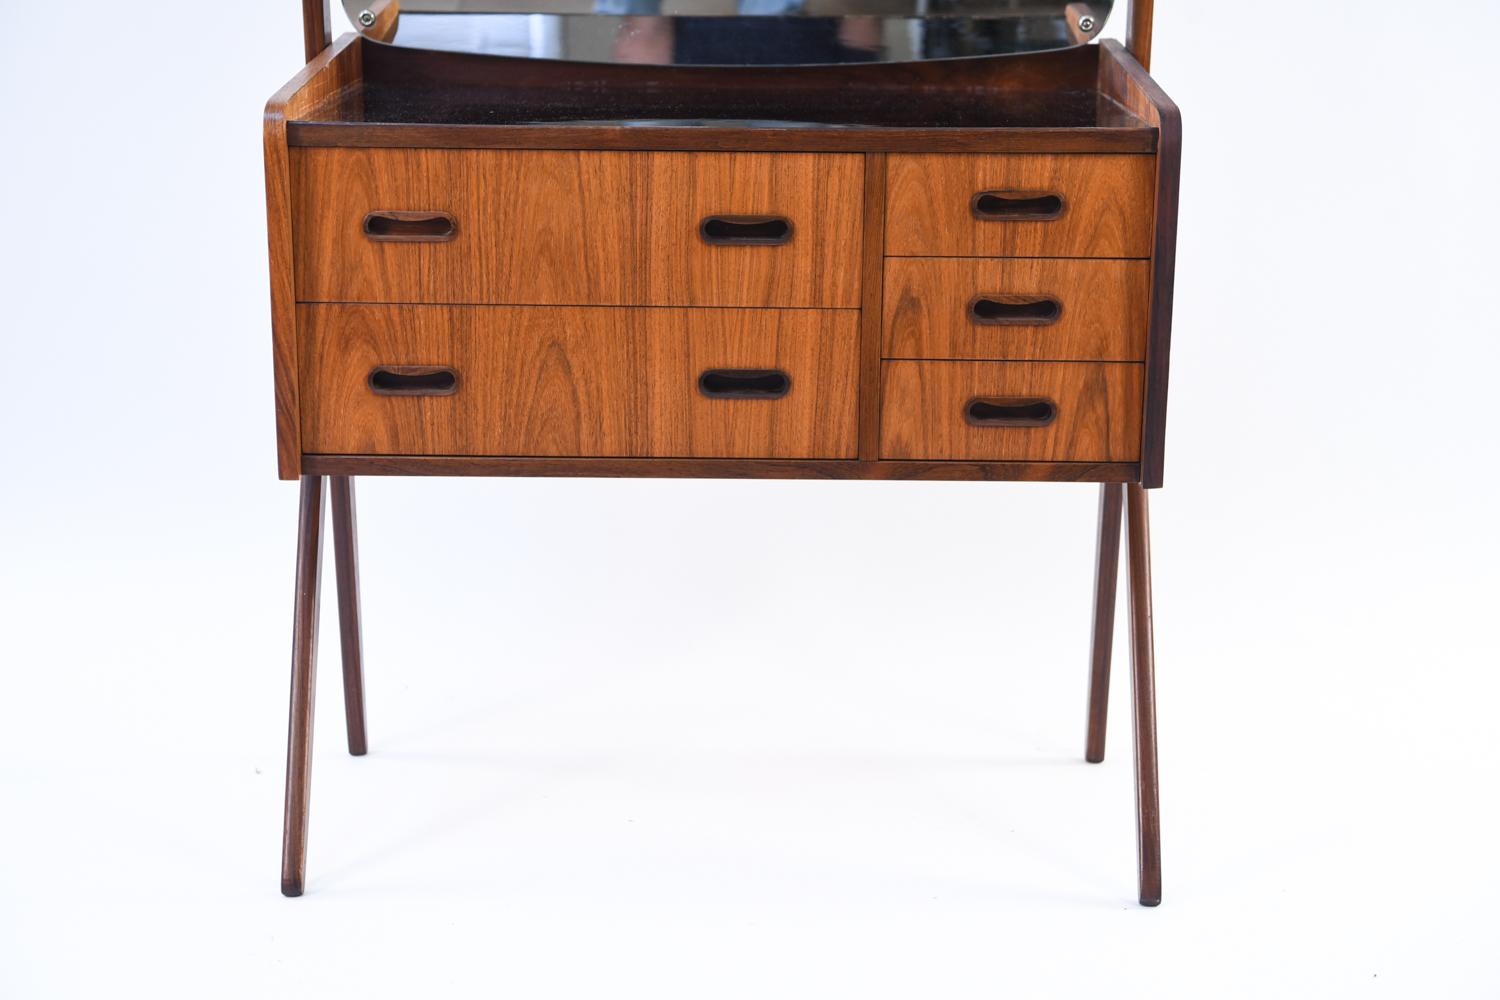 This Danish midcentury rosewood vanity has a mirrored back with rounded corners, upon a slender frame with angled legs. Drawers for storage make up the central portion of this modern piece.